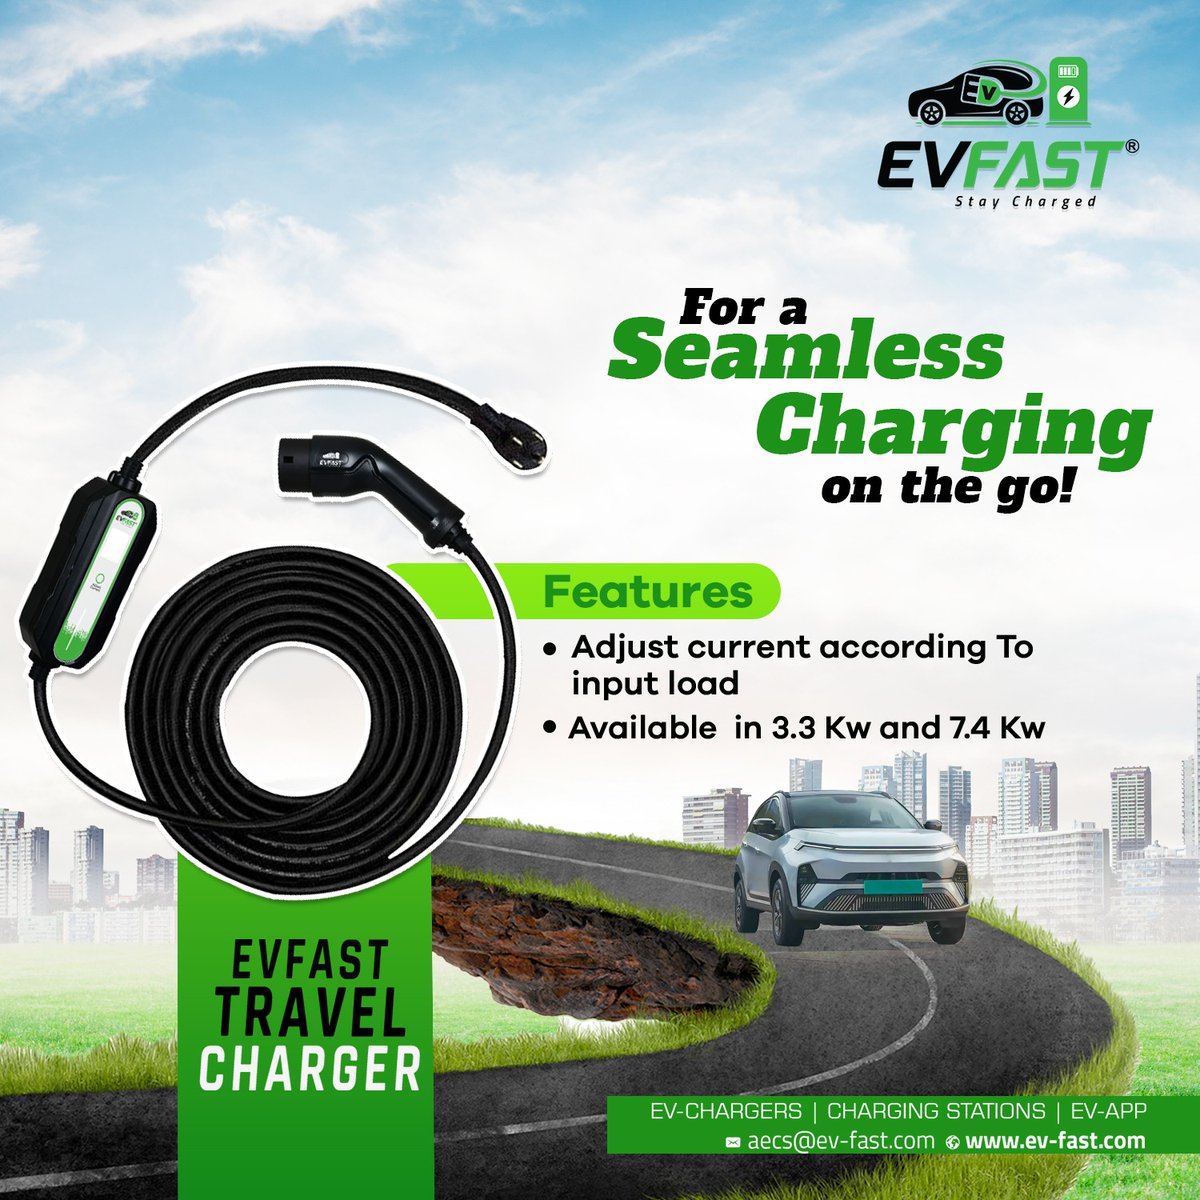 Our portable EV charger keeps your electric vehicle ready for the road ahead. Compact, fast, and reliable—it's your essential companion for any journey. Experience worry-free travel with EV Fast!

#EVFast #ElectricVehicles #EVCharging  #ElectricVehicleCharger #india